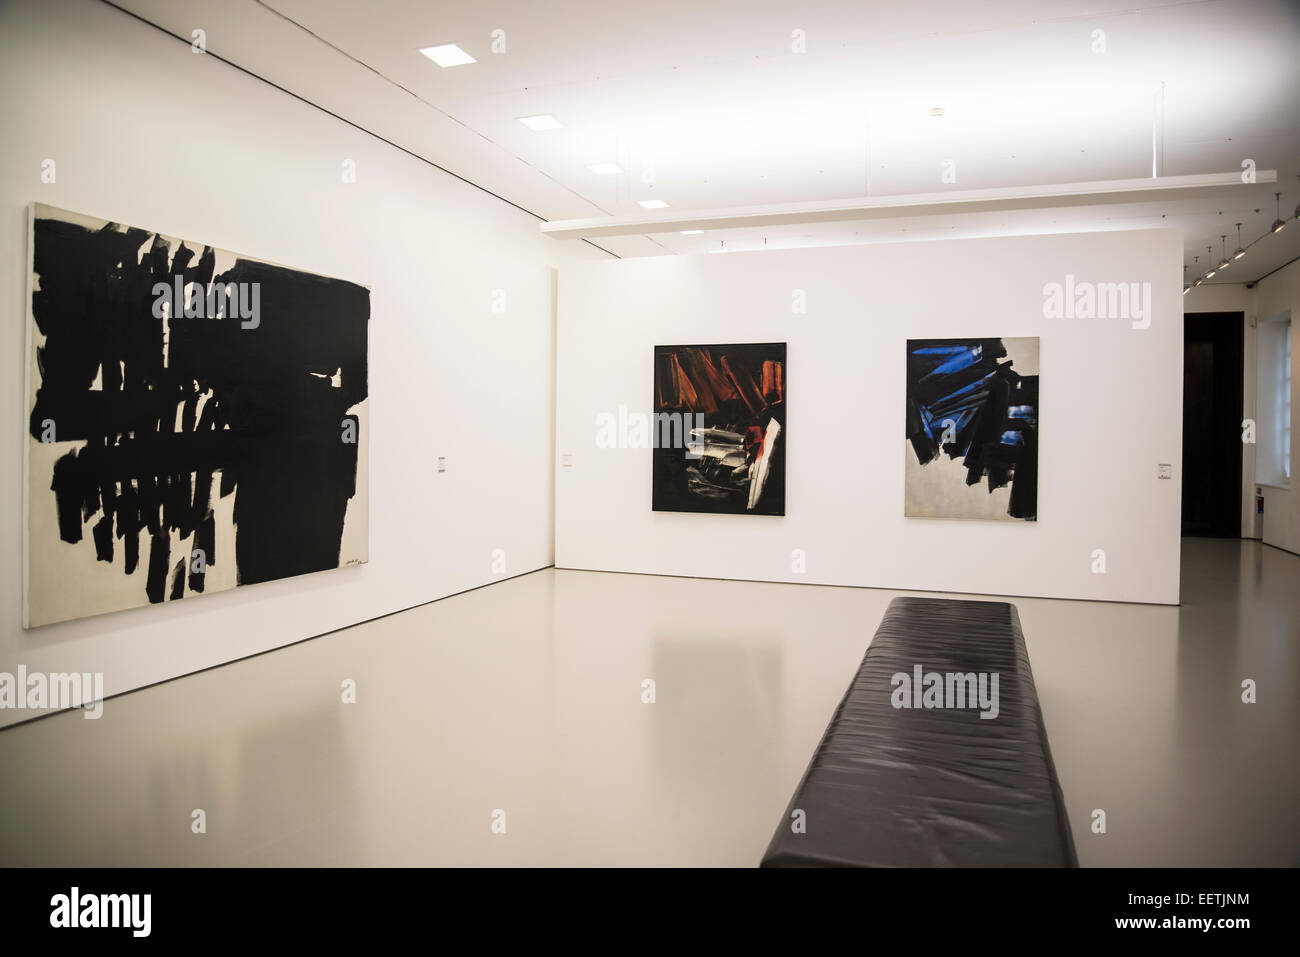 Pierre Soulages paintings, Fabre Museum, Montpellier, France Stock Photo